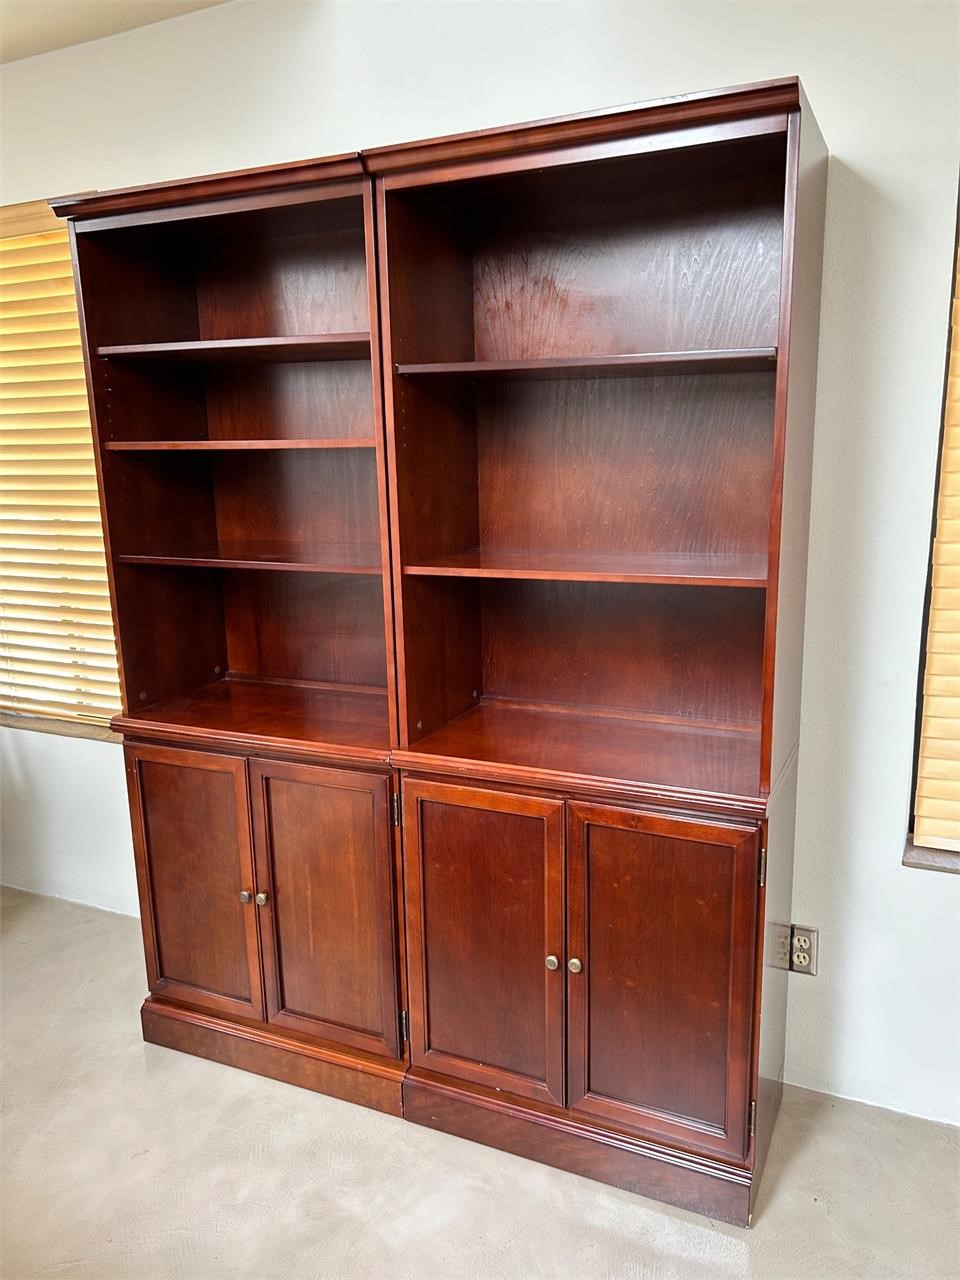 Matching Book Shelves / Cabinets